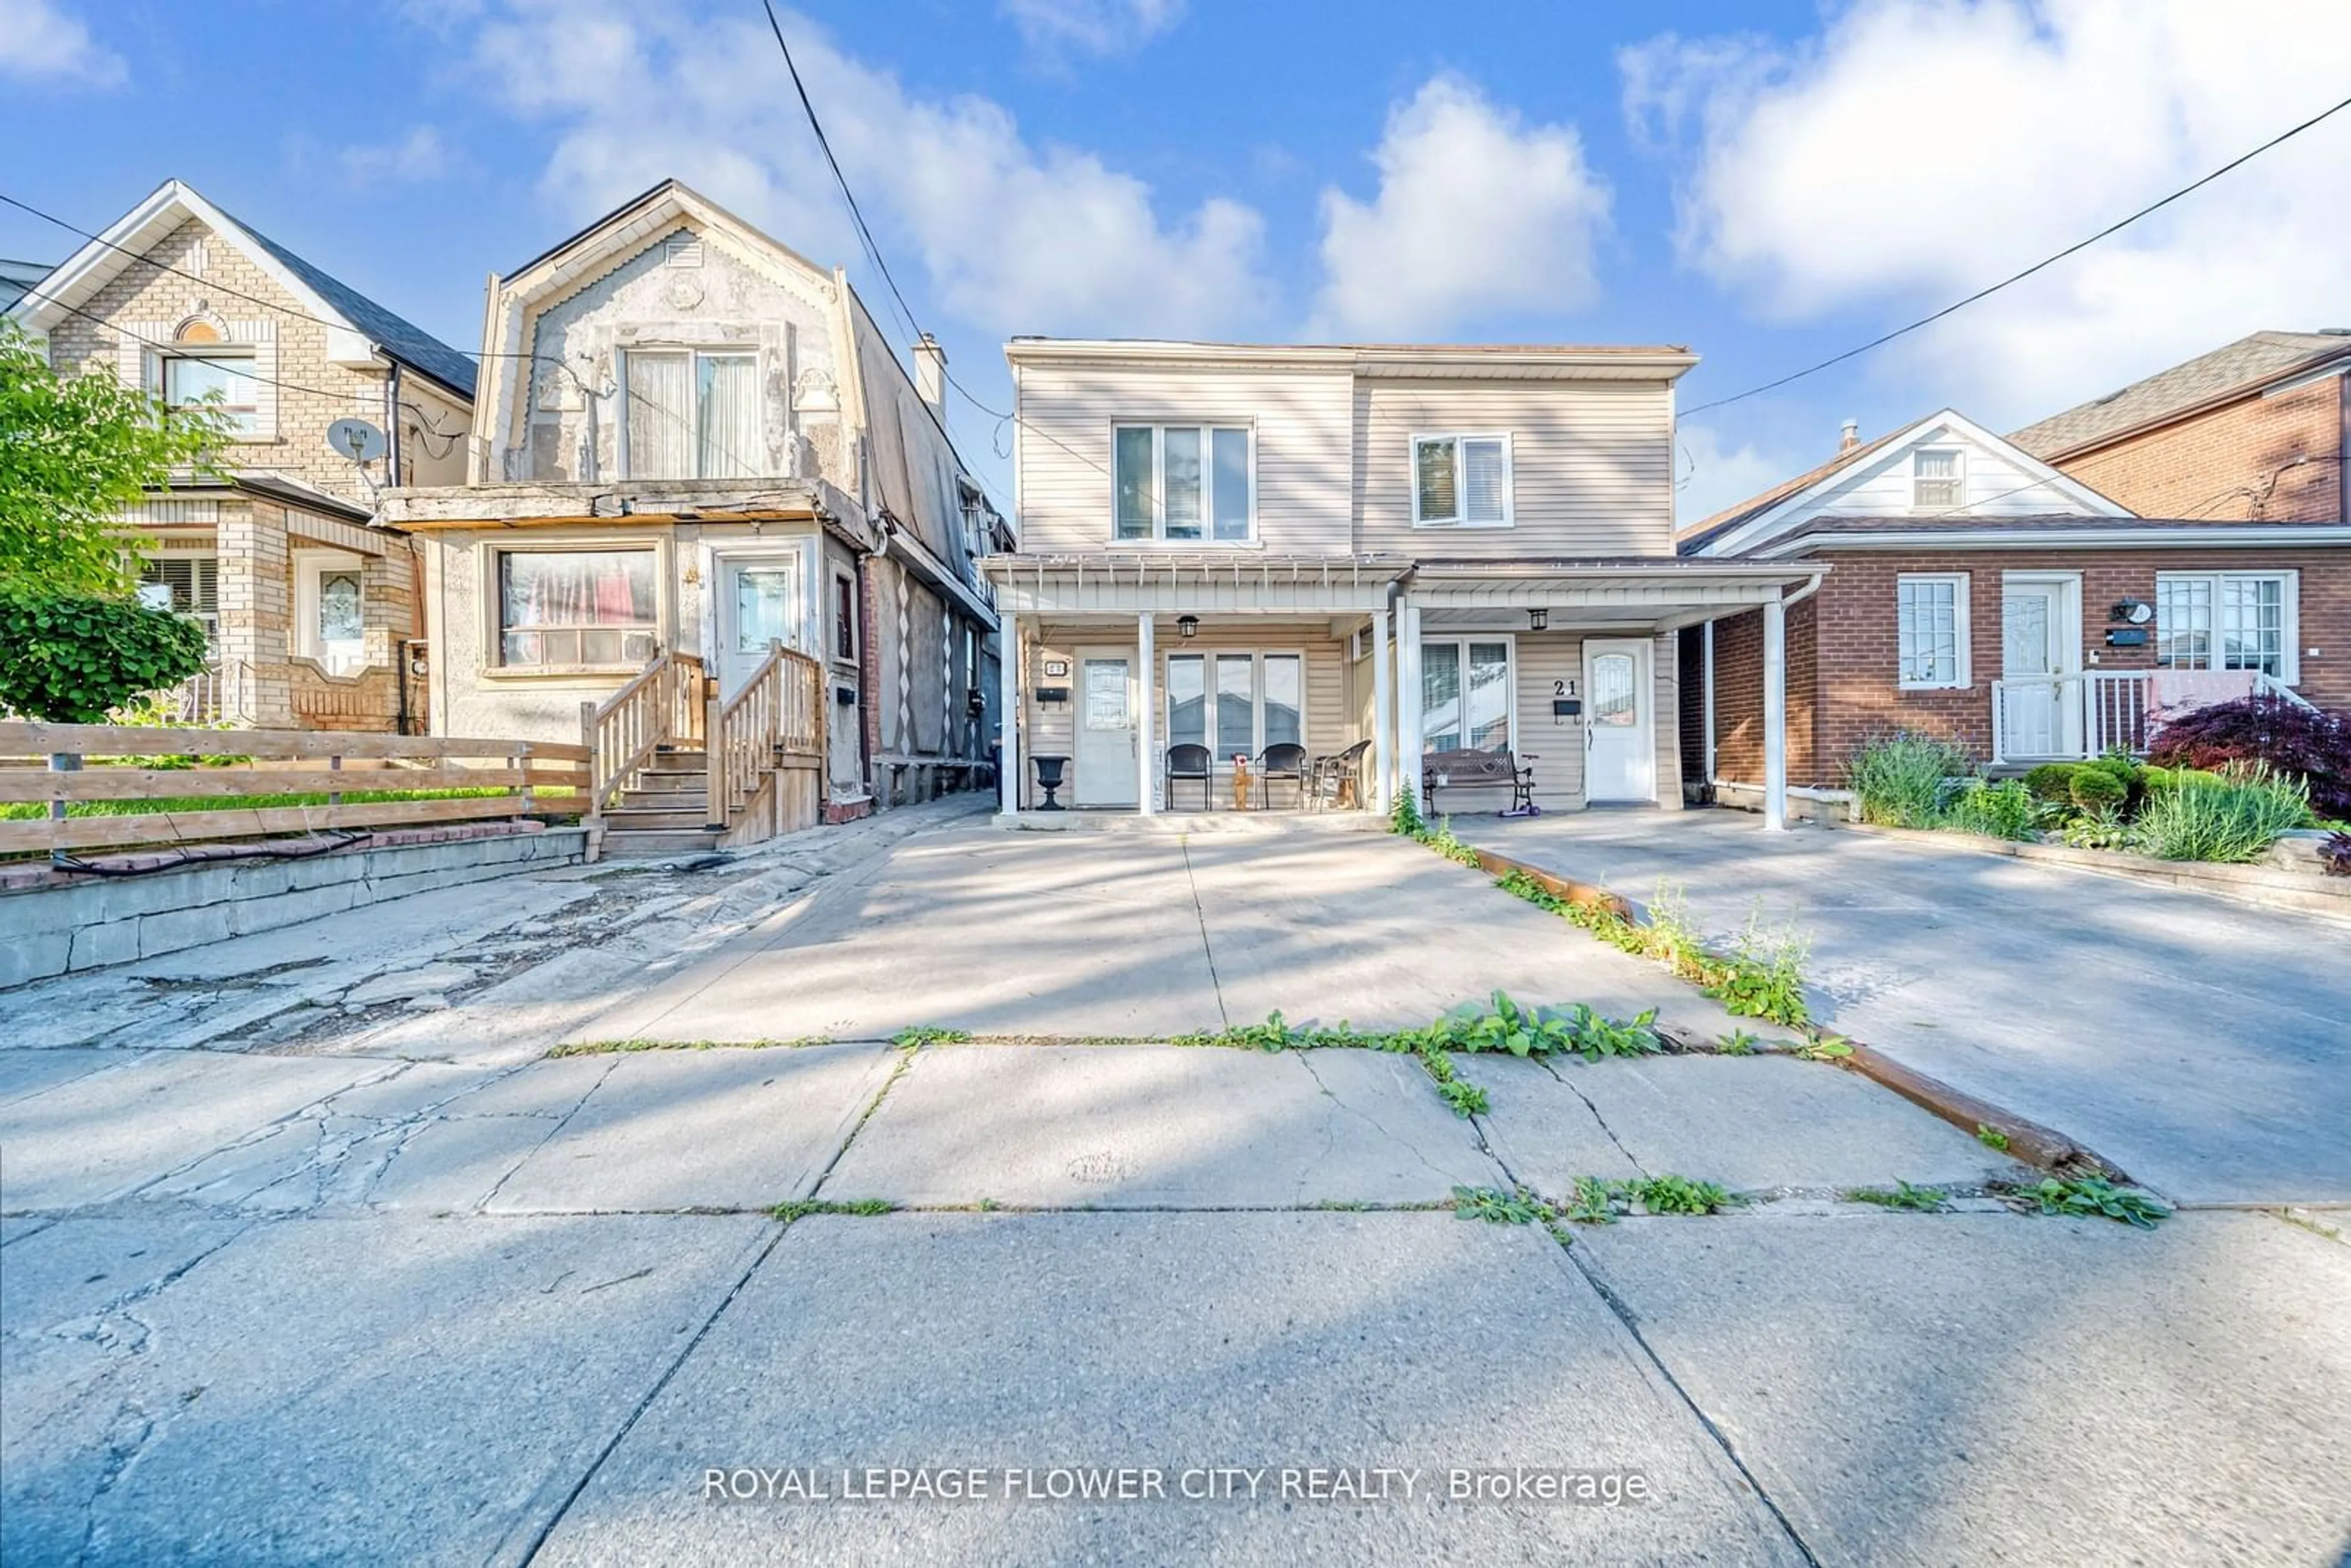 Frontside or backside of a home for 23 Failsworth Ave, Toronto Ontario M6M 3J3